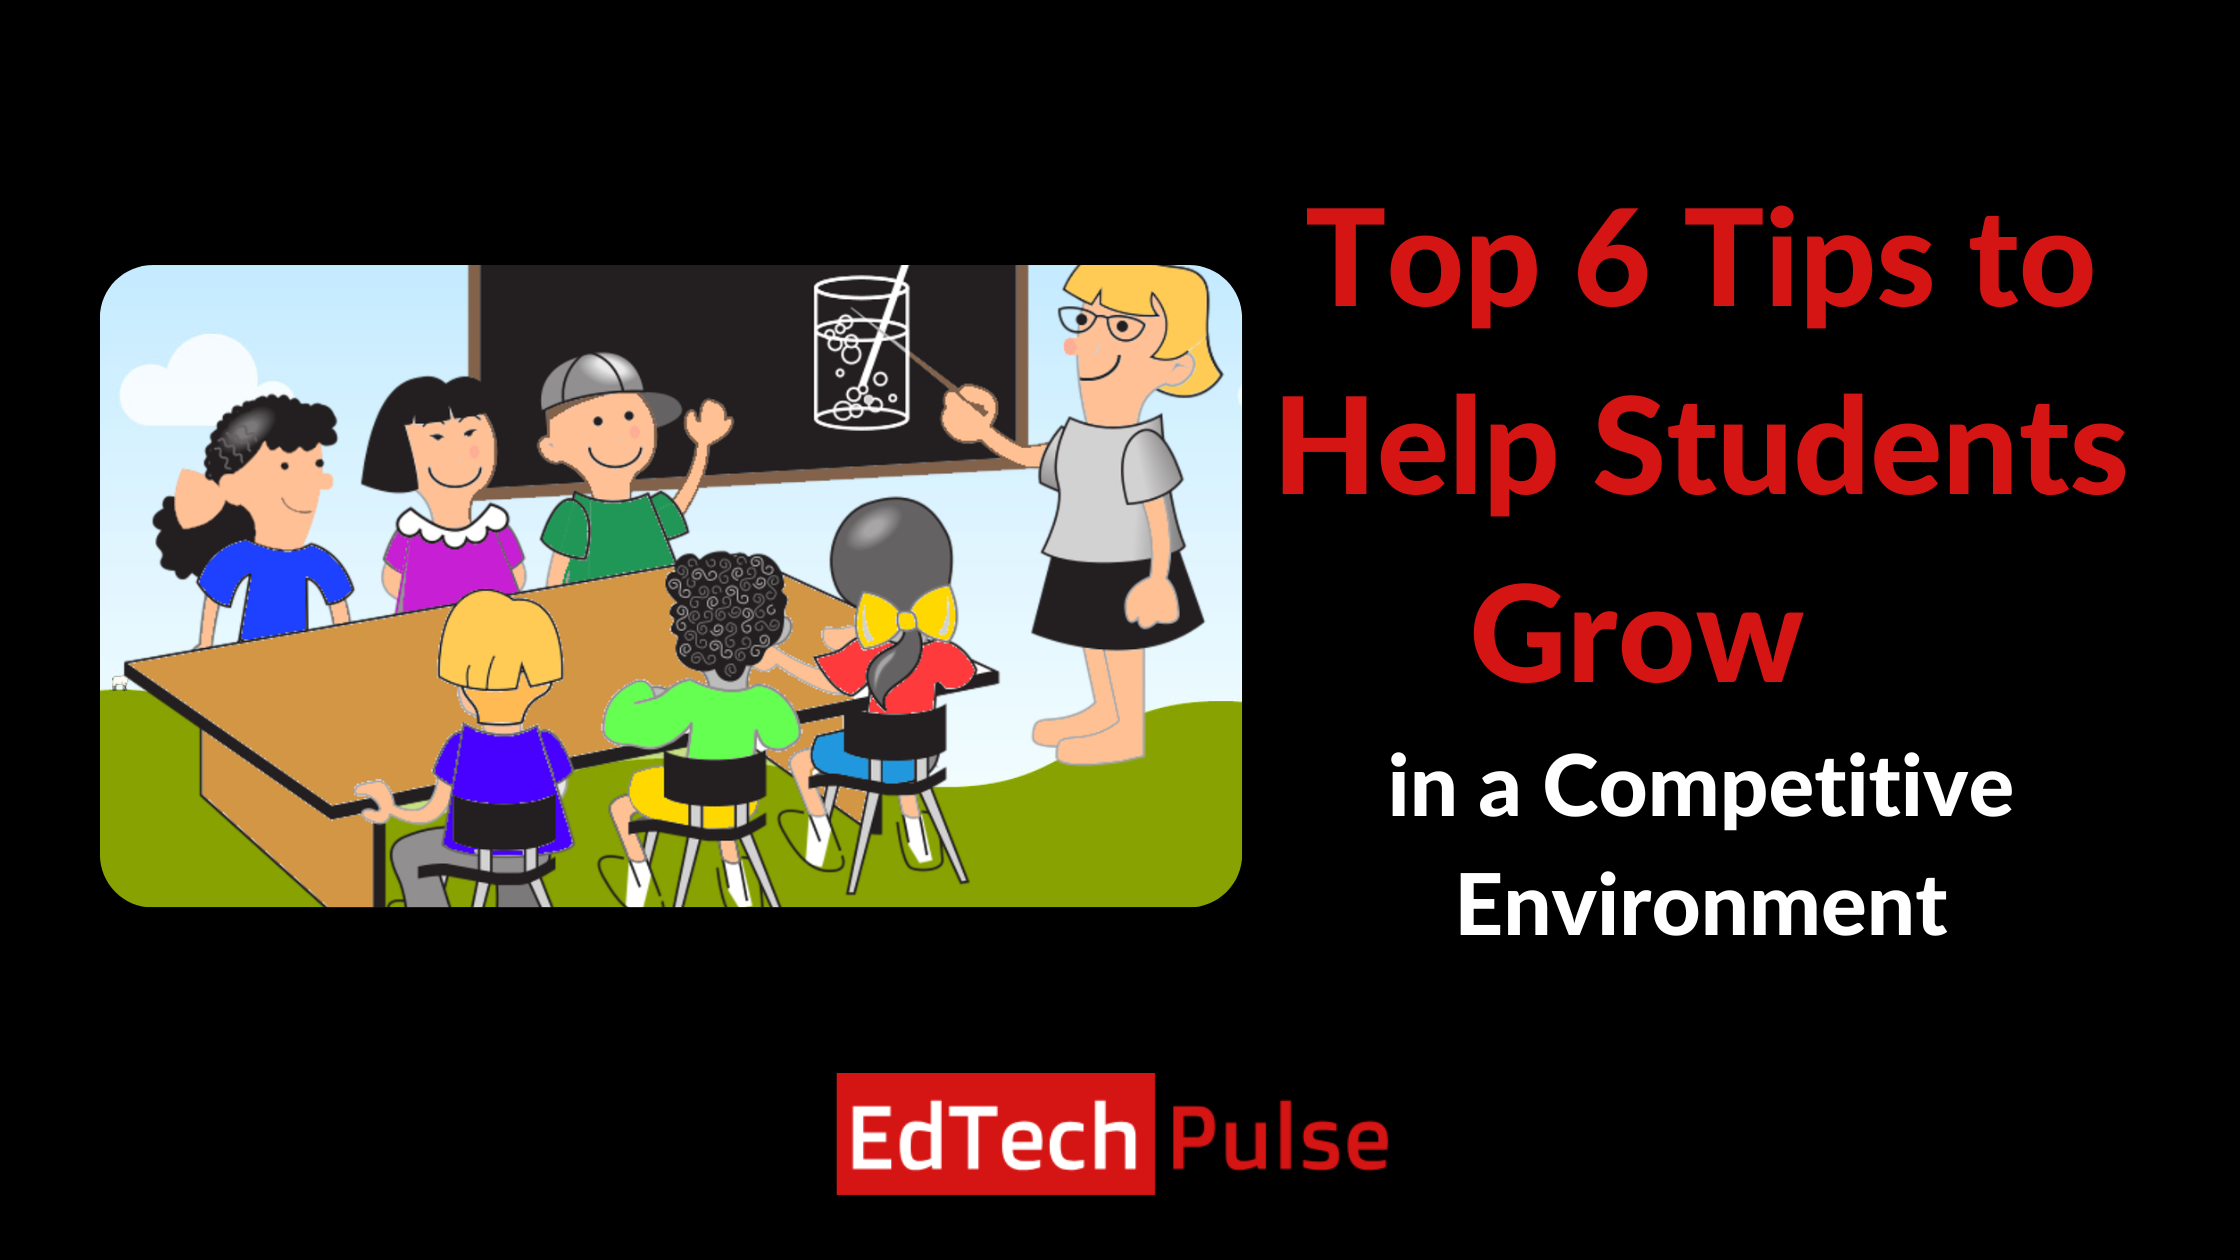 Top 6 Tips to Help Students Grow in a Competitive Environment